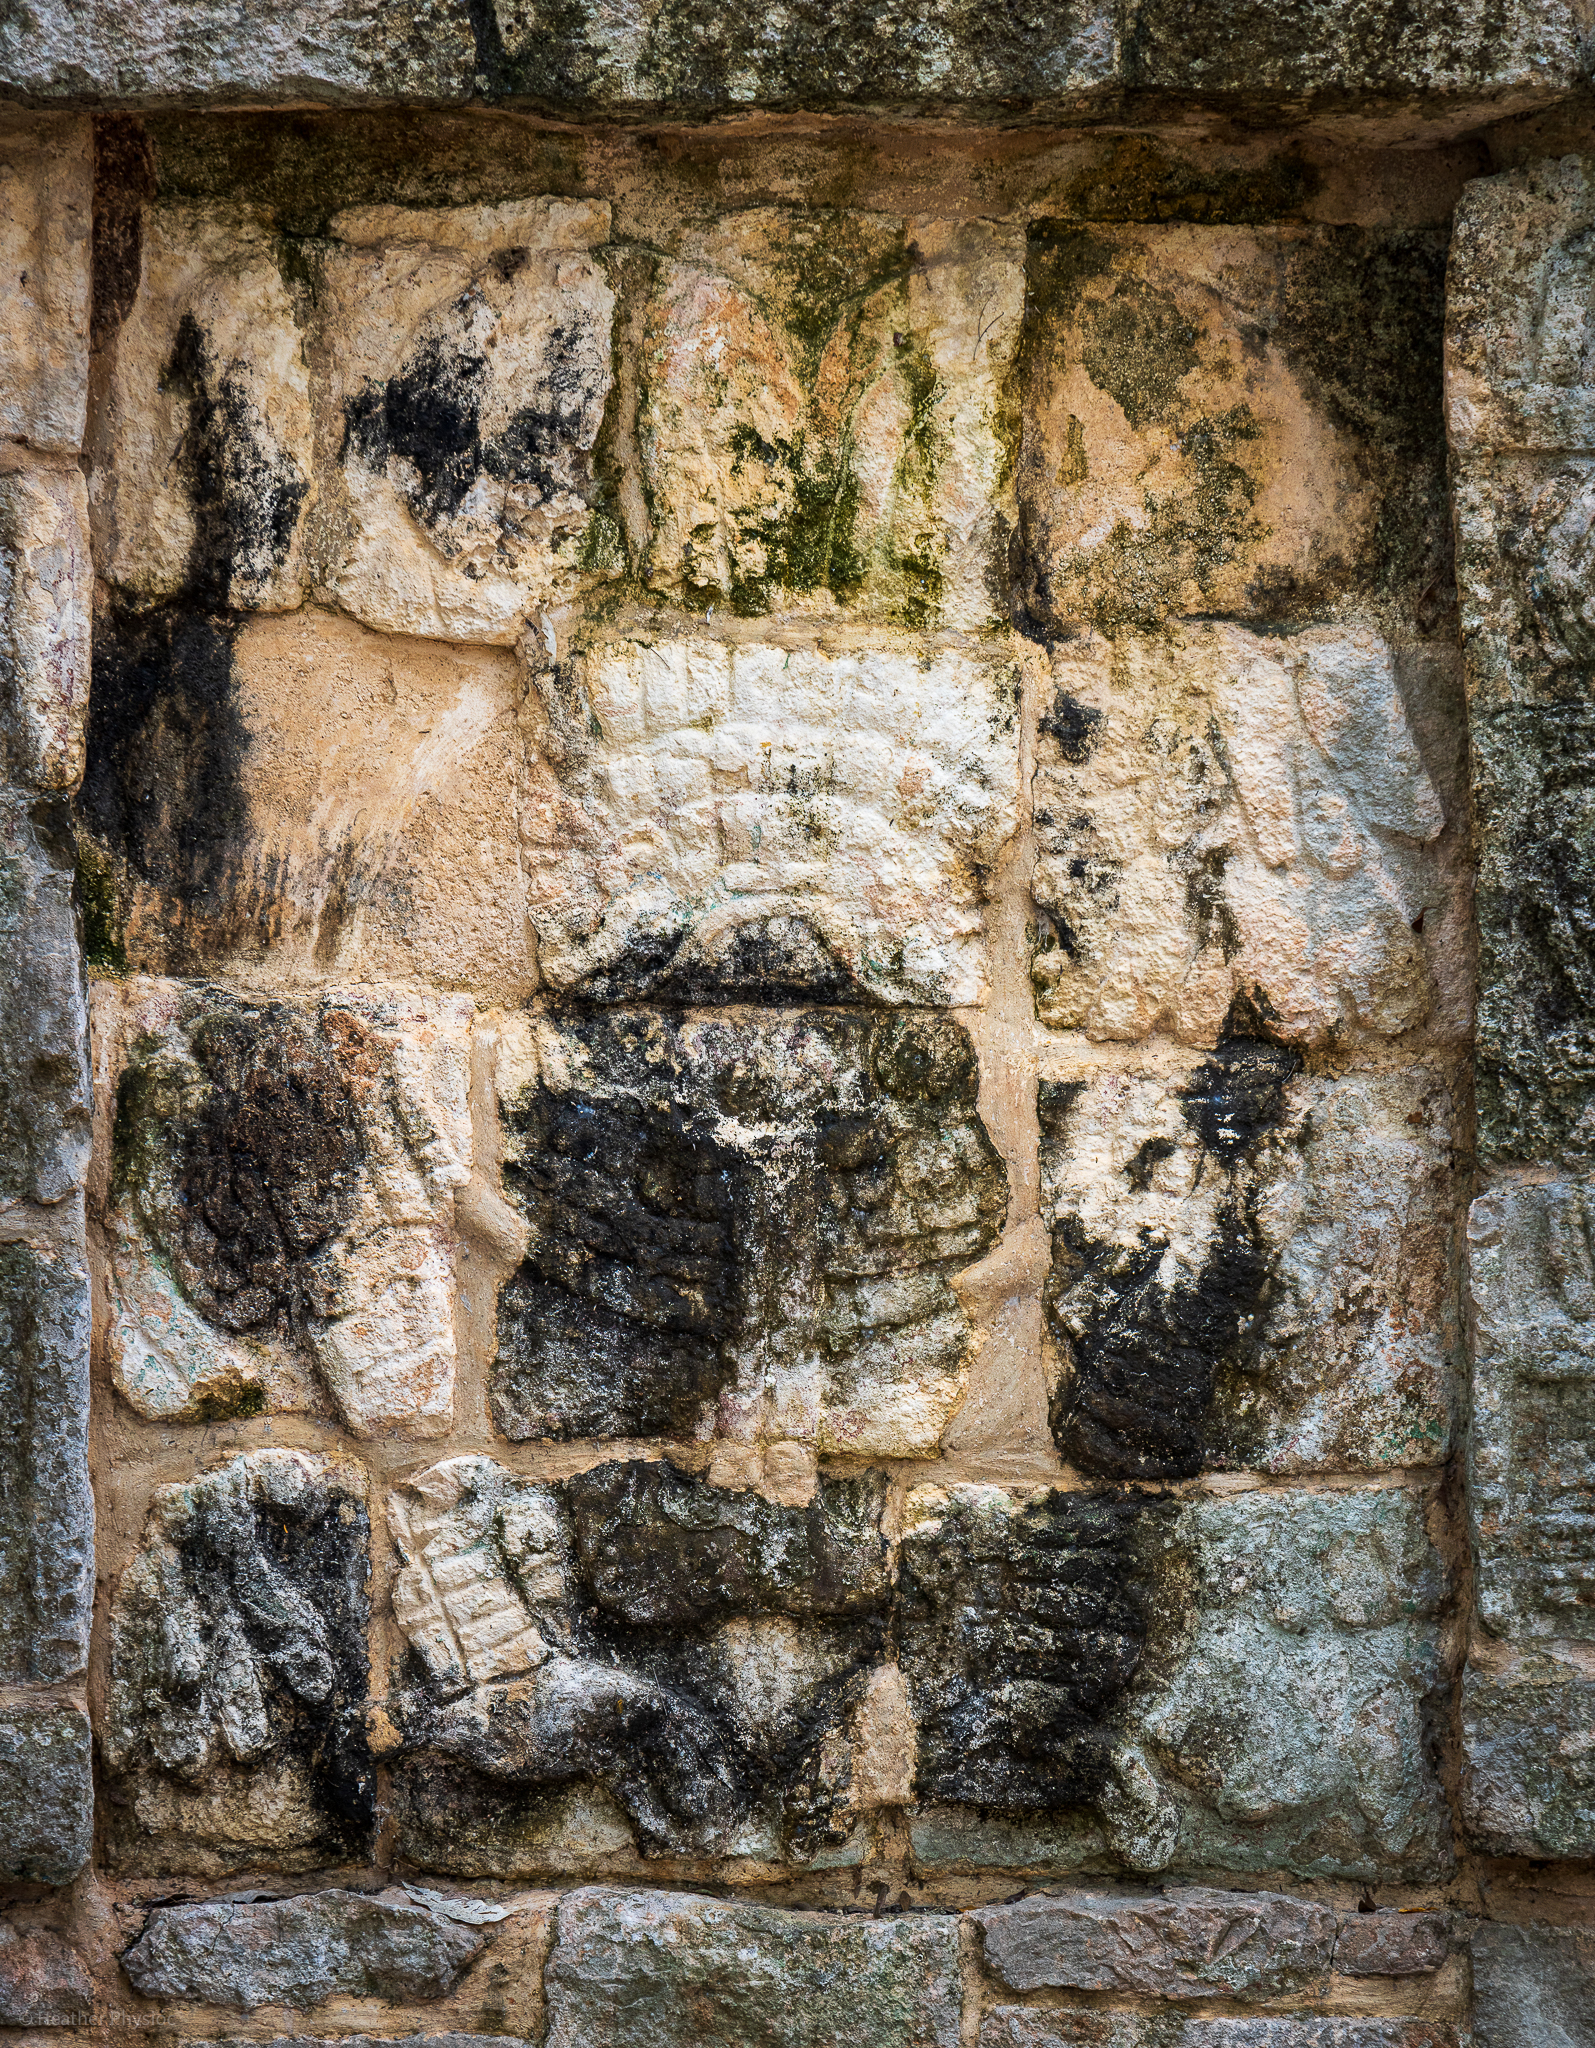 A close-up of the eroded ancient Mayan relief carvings on a stone wall at Chichen Itza. The image captures the textural details and the remnants of etchings despite the wear over centuries.